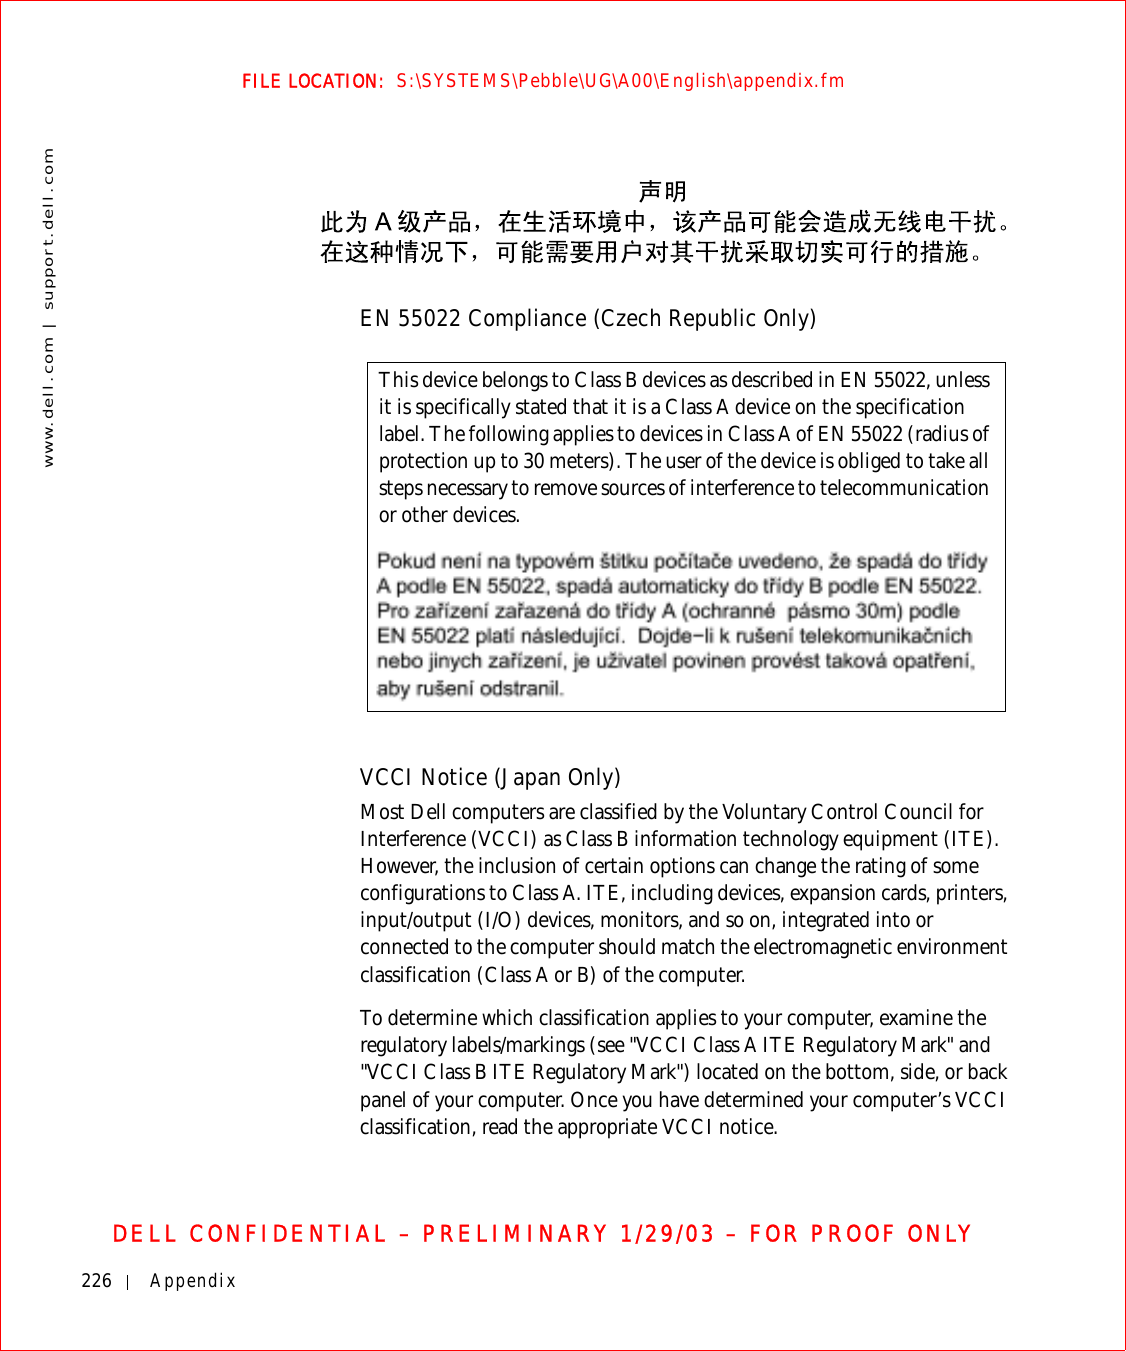 226 Appendixwww.dell.com | support.dell.comFILE LOCATION:  S:\SYSTEMS\Pebble\UG\A00\English\appendix.fmDELL CONFIDENTIAL – PRELIMINARY 1/29/03 – FOR PROOF ONLYEN 55022 Compliance (Czech Republic Only)VCCI Notice (Japan Only)Most Dell computers are classified by the Voluntary Control Council for Interference (VCCI) as Class B information technology equipment (ITE). However, the inclusion of certain options can change the rating of some configurations to Class A. ITE, including devices, expansion cards, printers, input/output (I/O) devices, monitors, and so on, integrated into or connected to the computer should match the electromagnetic environment classification (Class A or B) of the computer.To determine which classification applies to your computer, examine the regulatory labels/markings (see &quot;VCCI Class A ITE Regulatory Mark&quot; and &quot;VCCI Class B ITE Regulatory Mark&quot;) located on the bottom, side, or back panel of your computer. Once you have determined your computer’s VCCI classification, read the appropriate VCCI notice.This device belongs to Class B devices as described in EN 55022, unless it is specifically stated that it is a Class A device on the specification label. The following applies to devices in Class A of EN 55022 (radius of protection up to 30 meters). The user of the device is obliged to take all steps necessary to remove sources of interference to telecommunication or other devices.